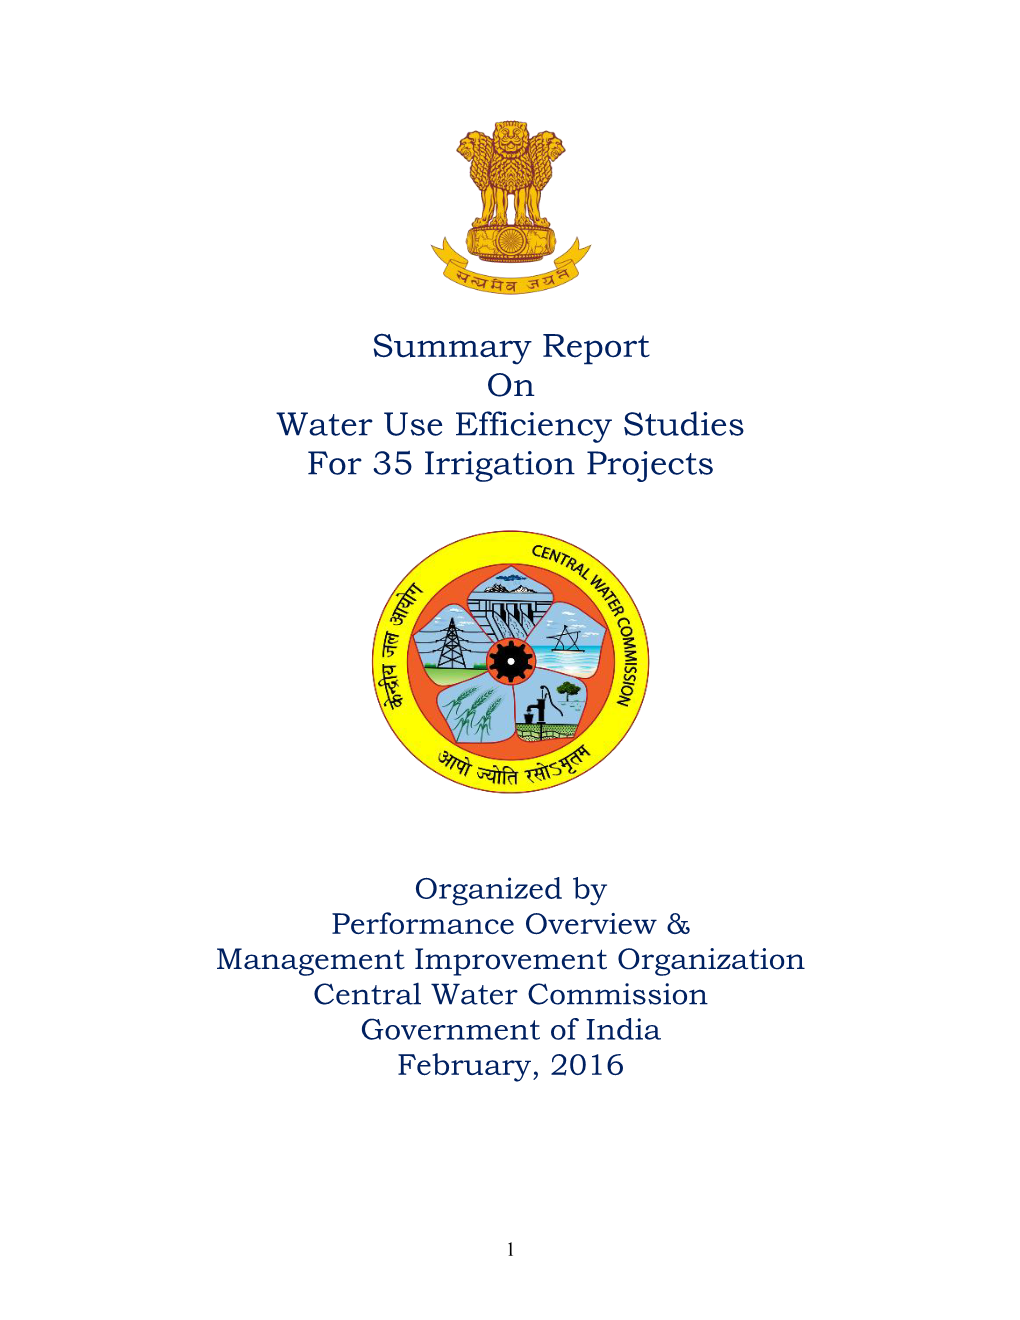 Summary Report on Water Use Efficiency Studies for 35 Irrigation Projects